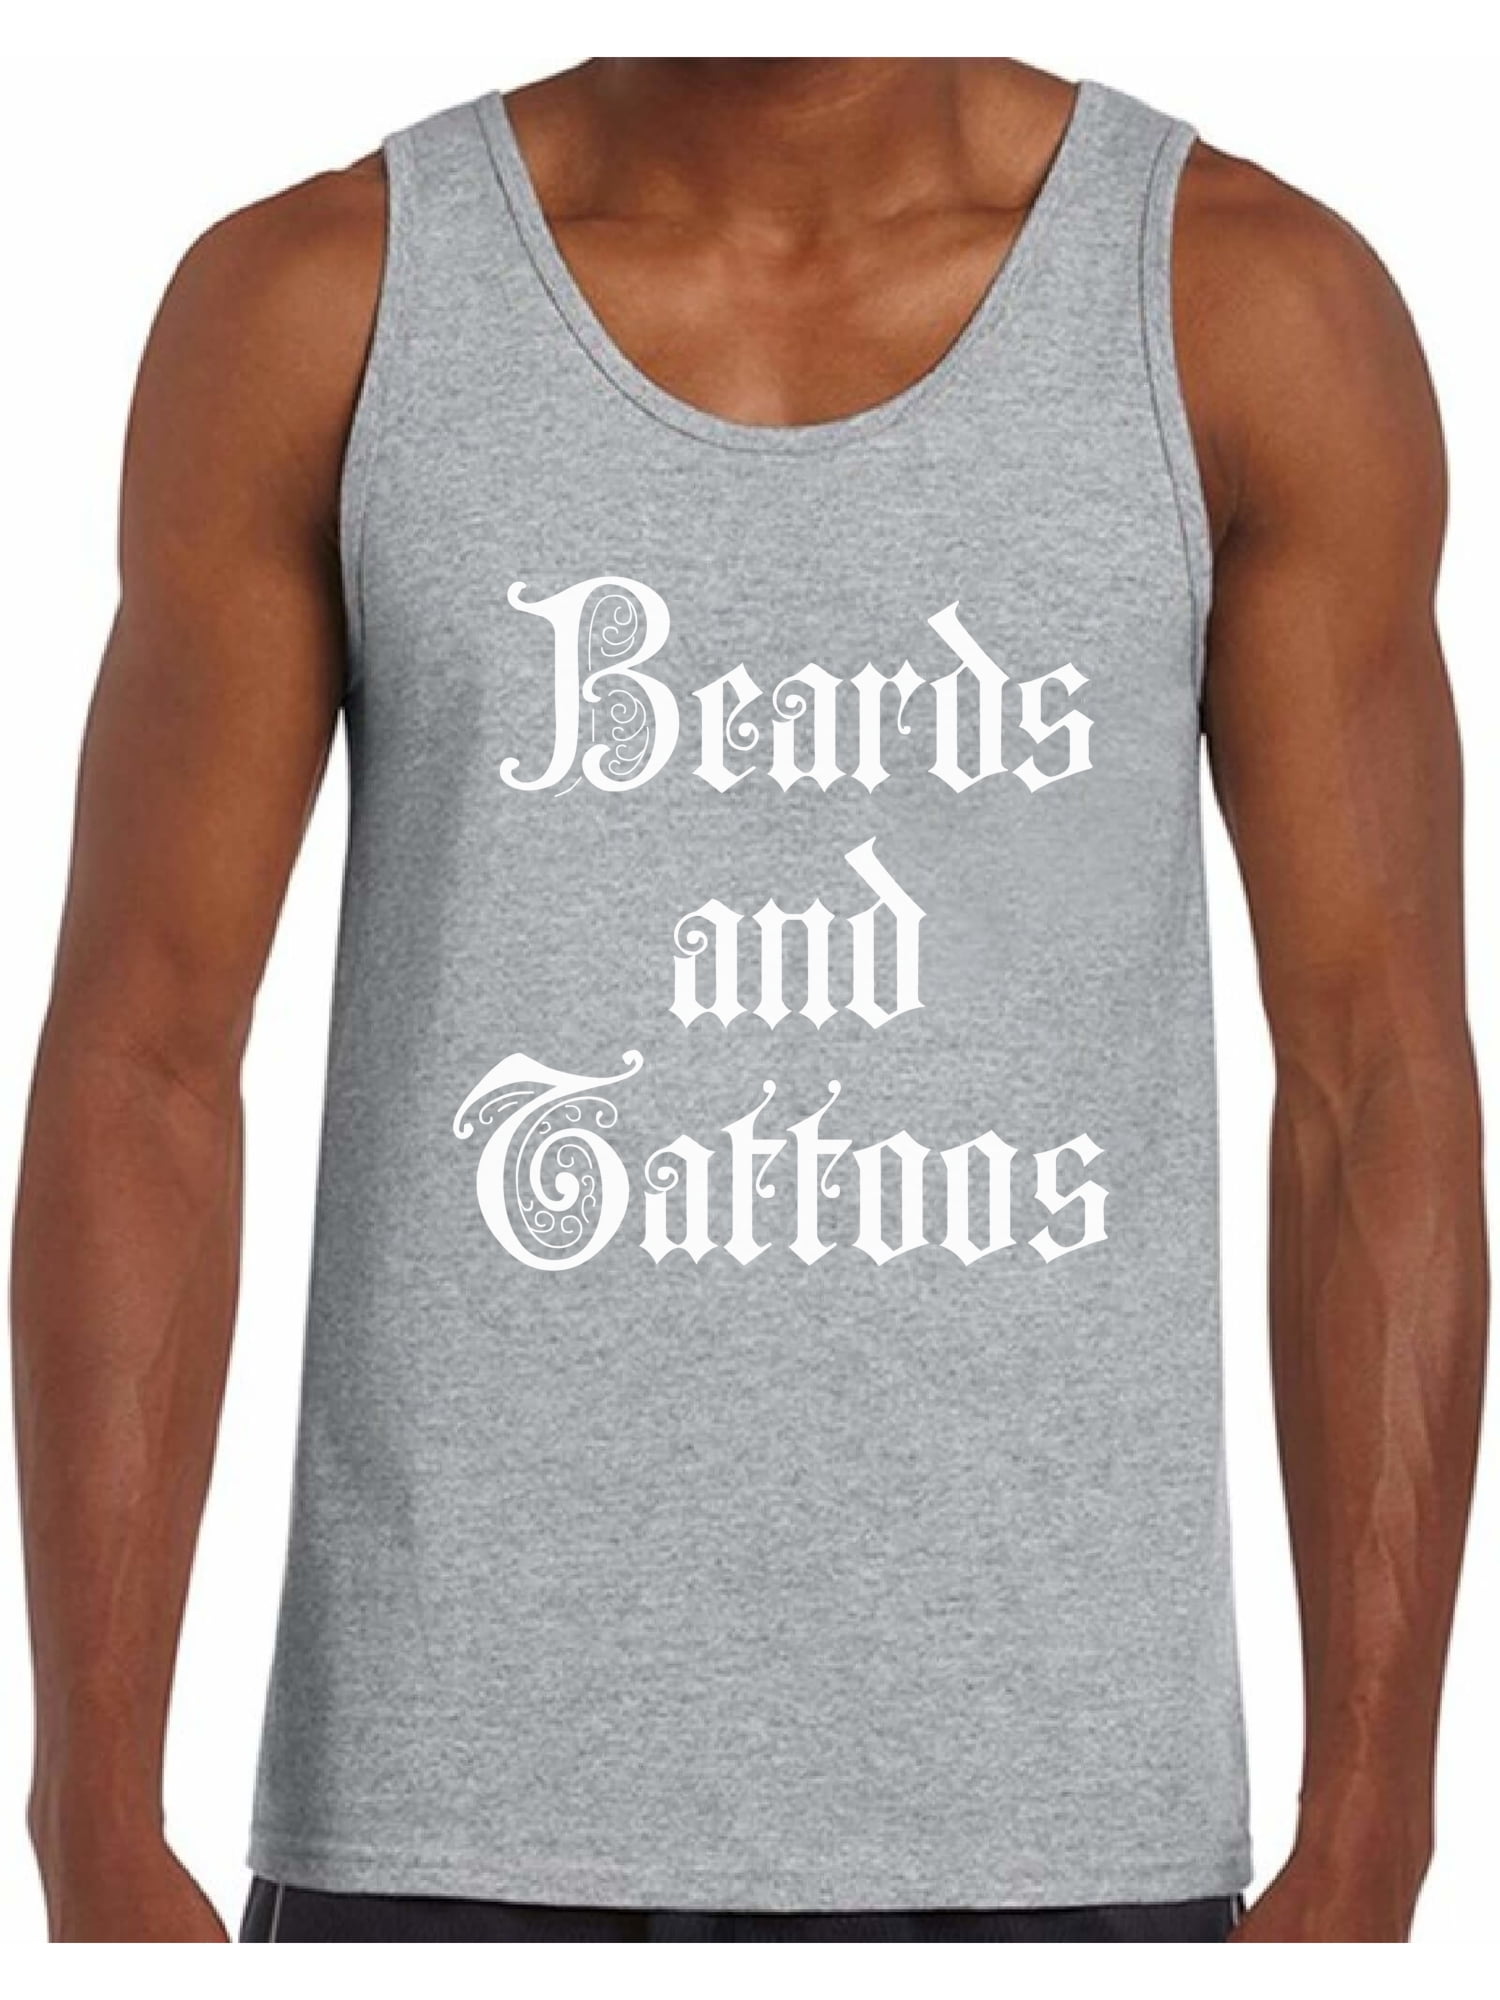 You Had Me At Beard Womens Vest Tank Top Bearded Clothing Womens Clothing Tops & Tees Tanks 